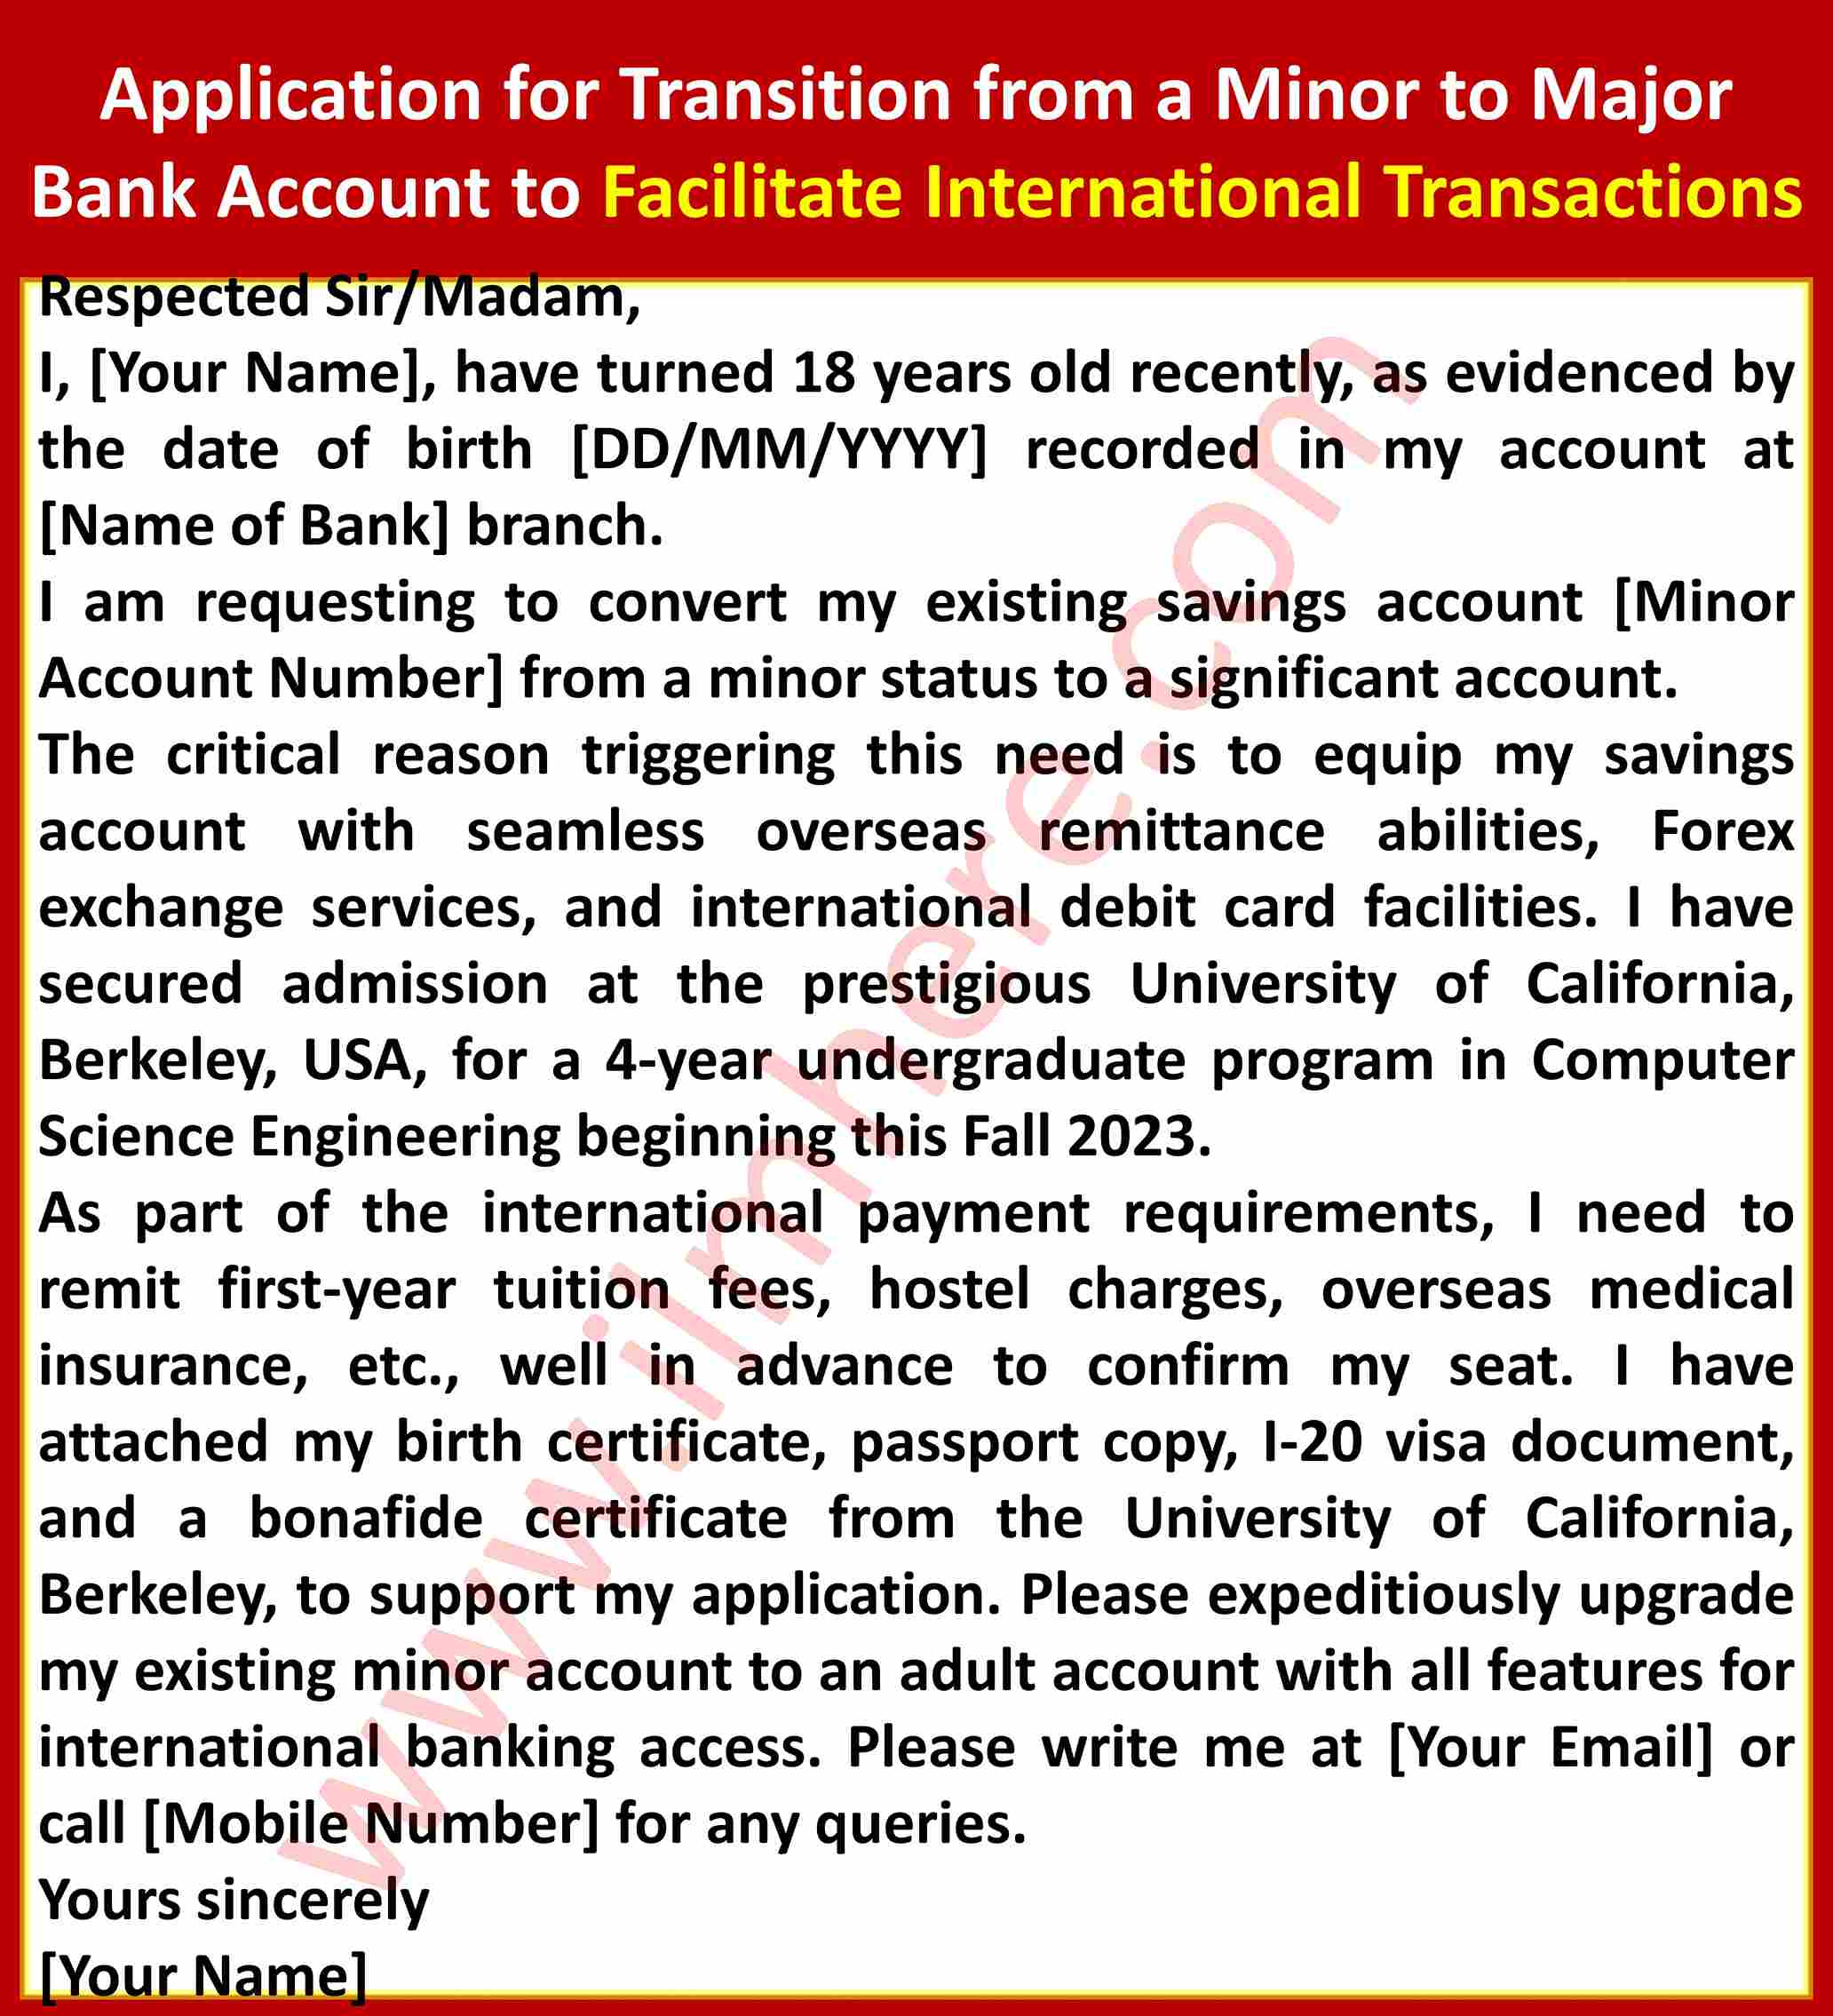 Application for Transition from a Minor to Major Bank Account to Facilitate International Transactions